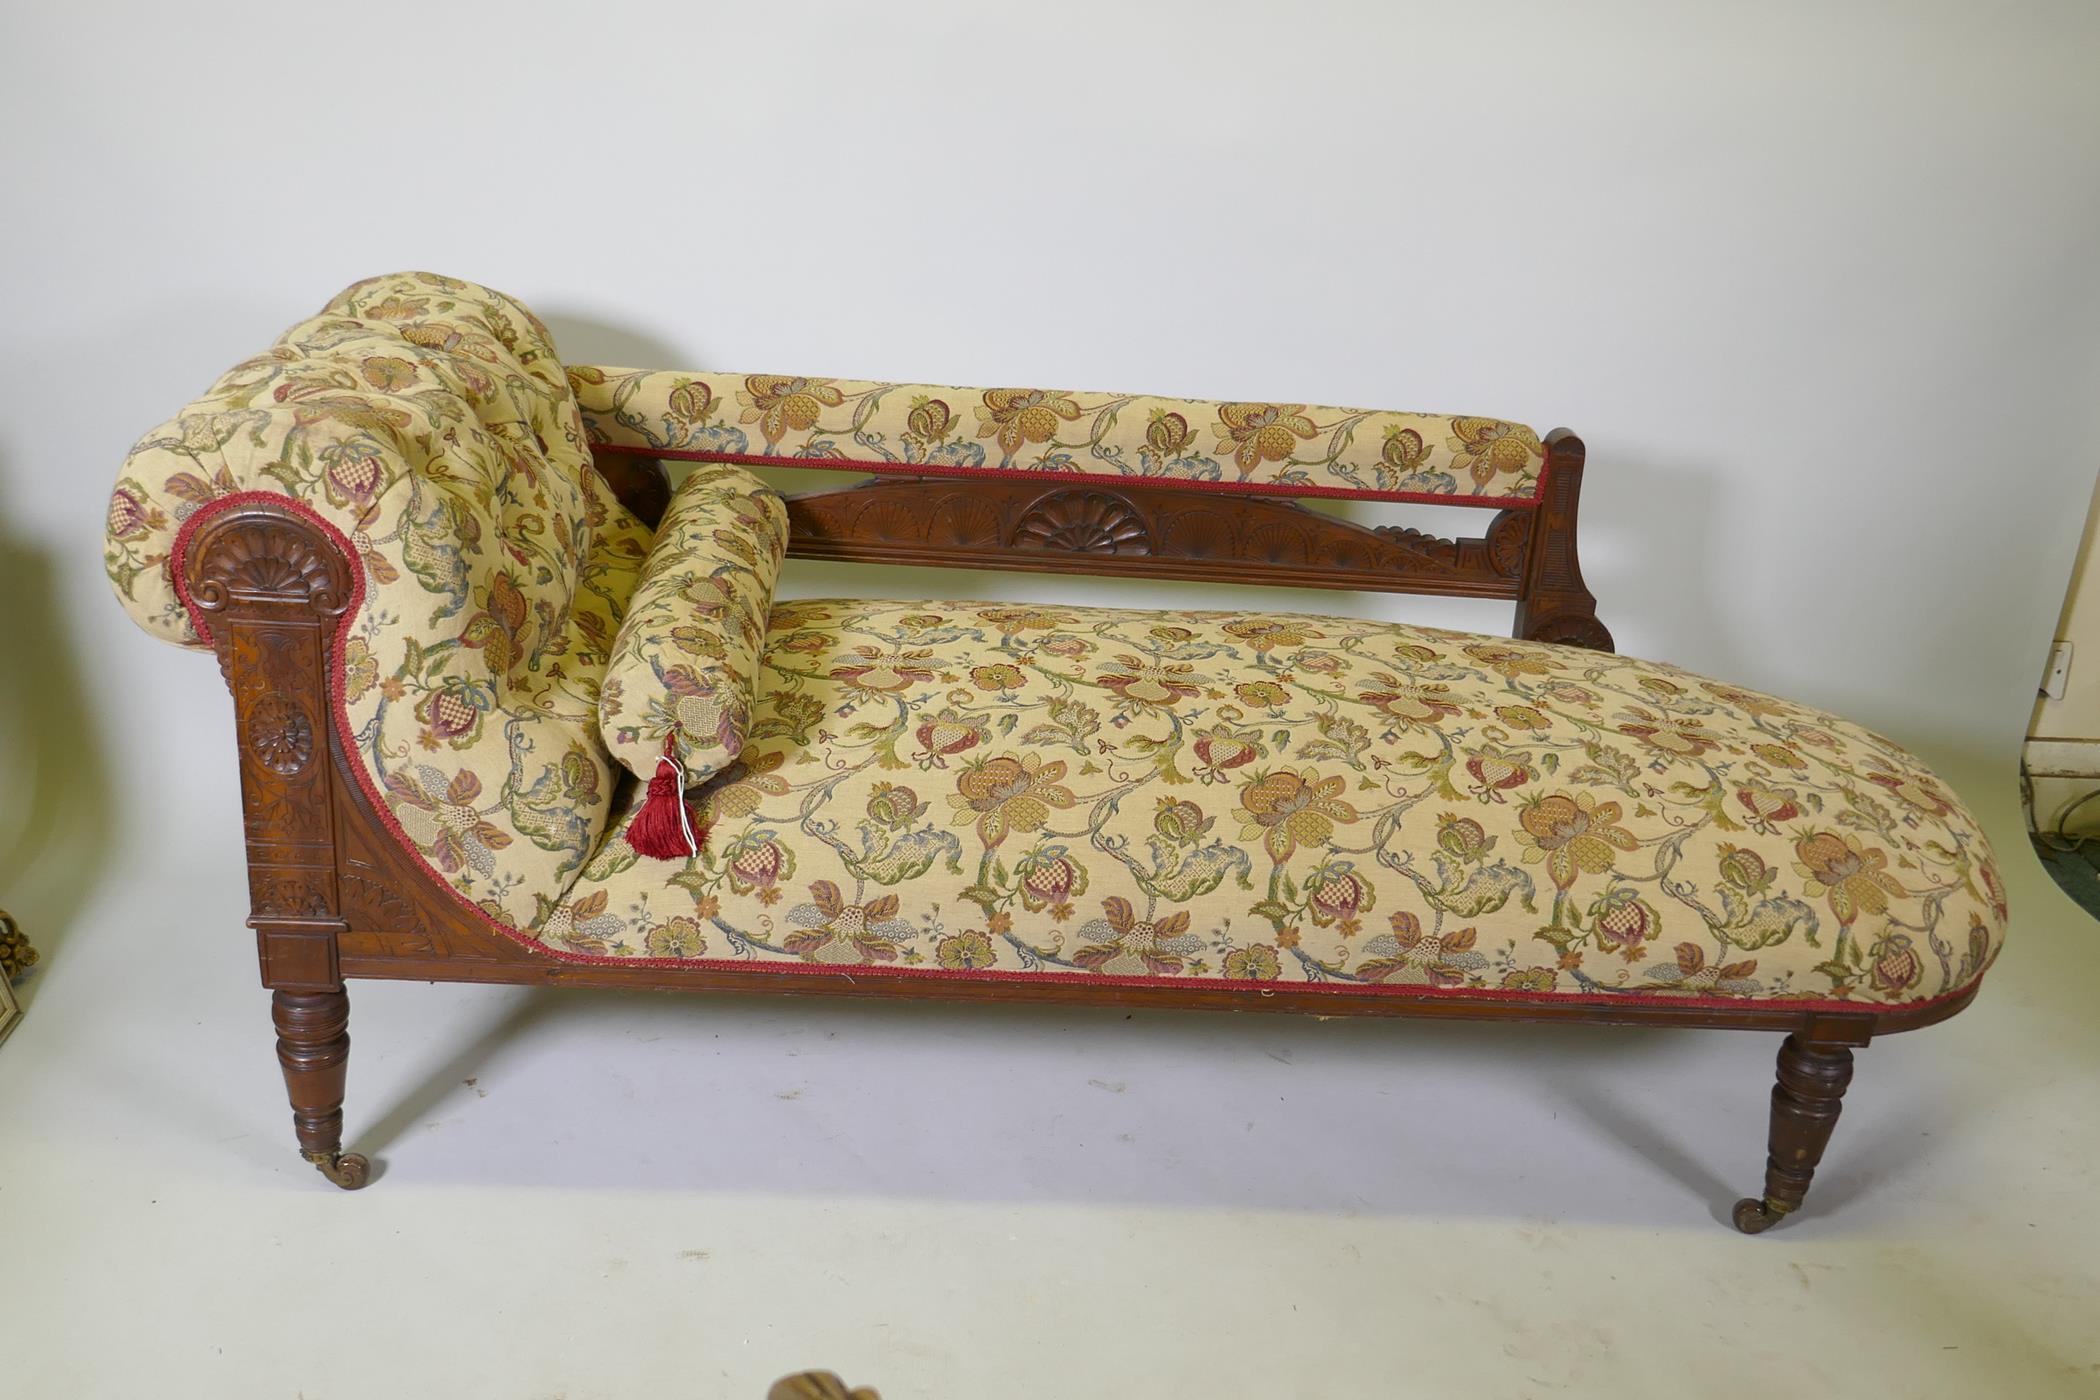 A Victorian walnut chaise longue with carved Grecian style decoration and good upholstery, 180cm - Image 2 of 4